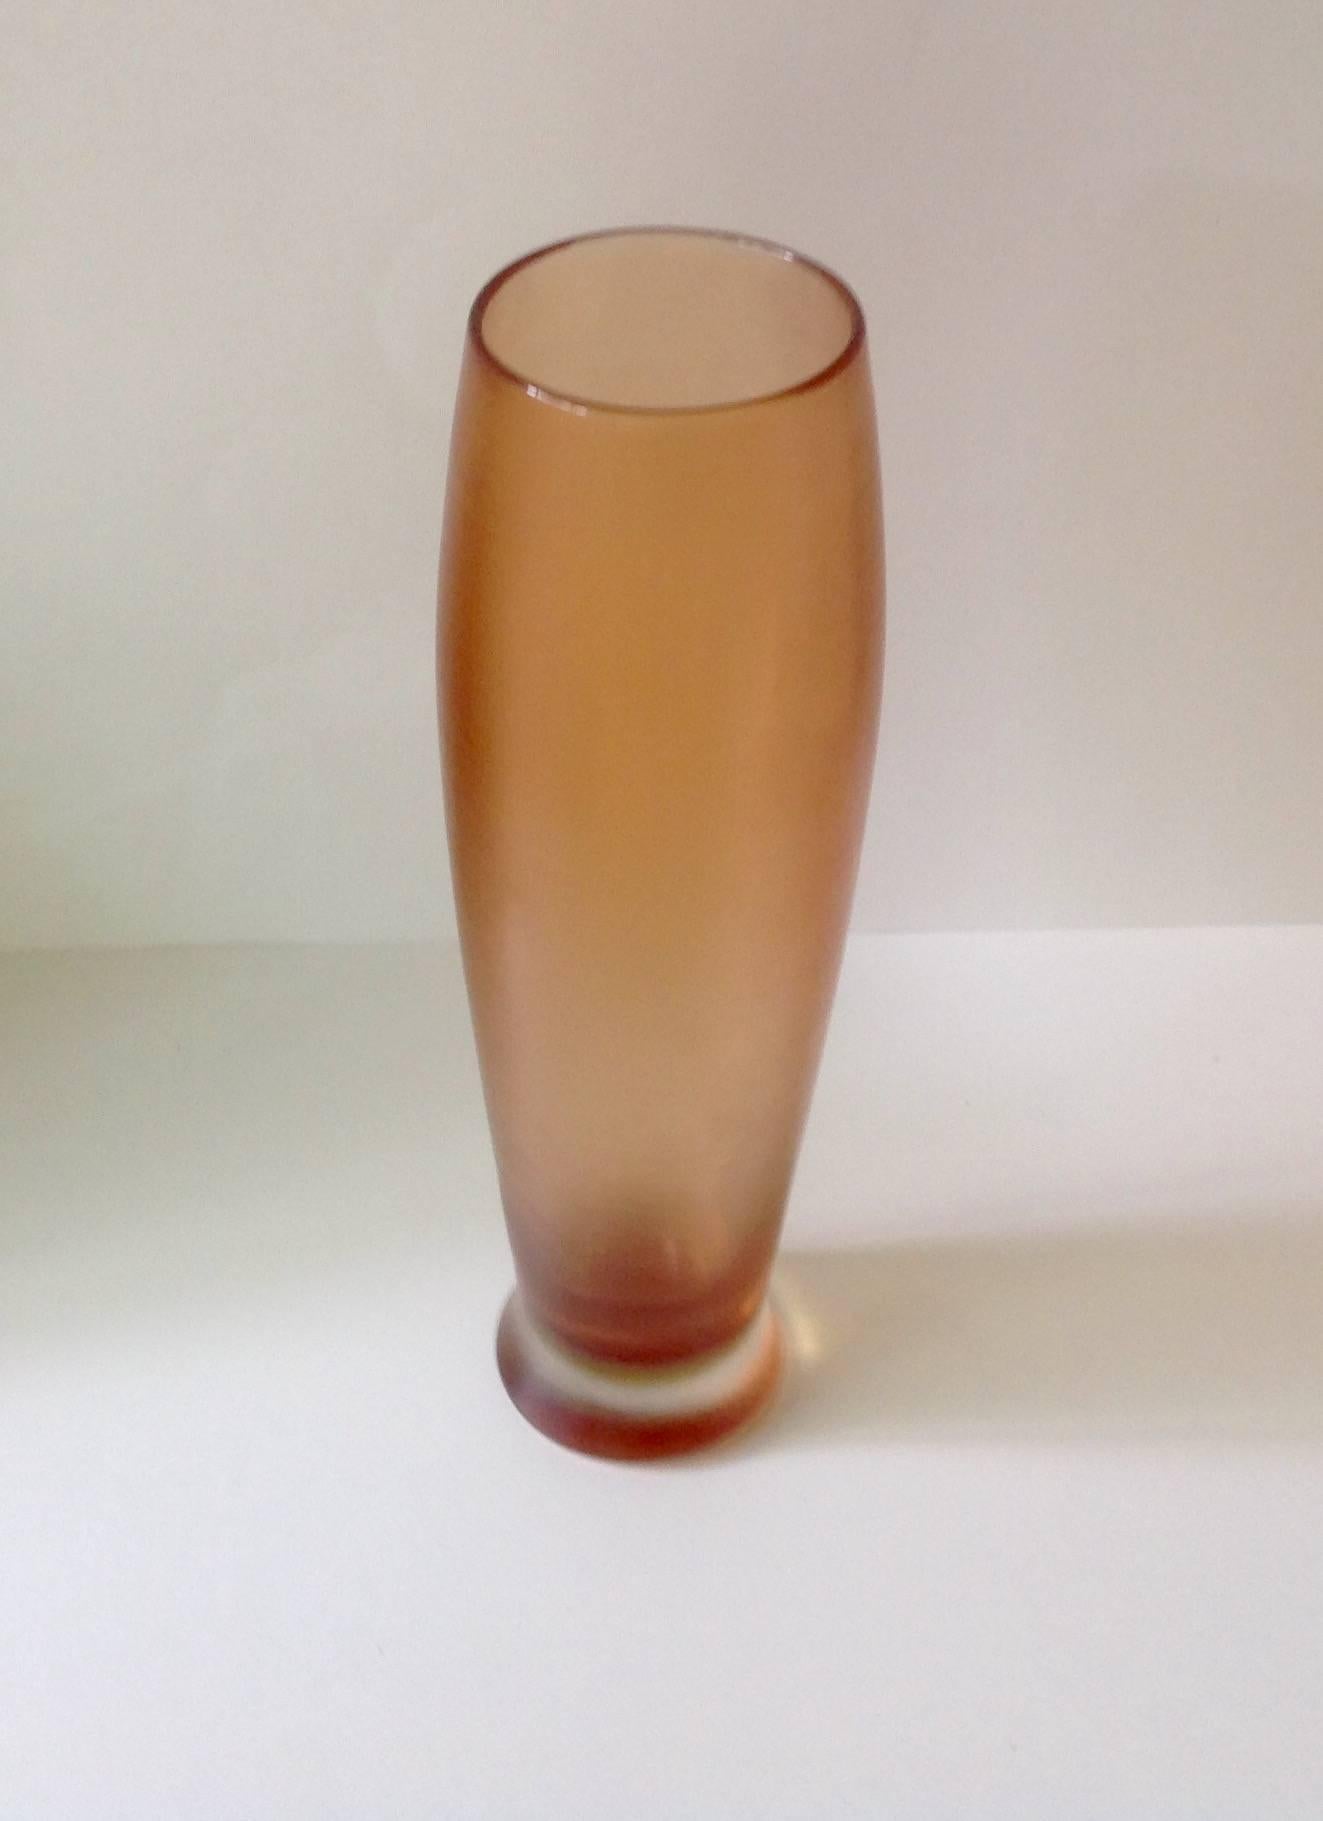 Beautiful Inciso Sommerso vase by Paolo Venini signed with the three line acid stamp Venini Murano italia.